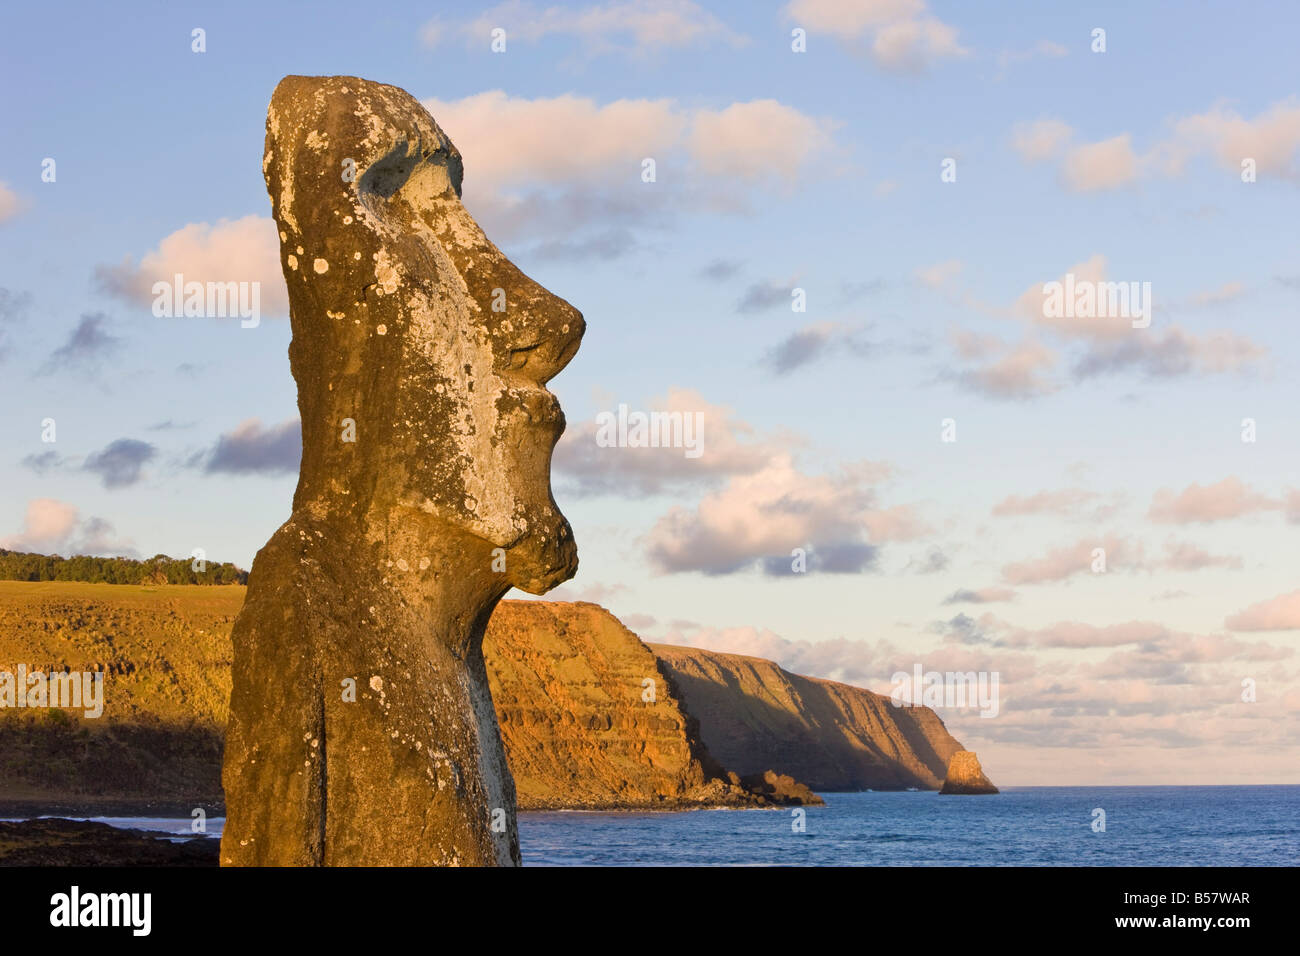 Lone monolithic giant stone Moai statue looking out to sea at Tongariki, Easter Island, Chile, South America Stock Photo